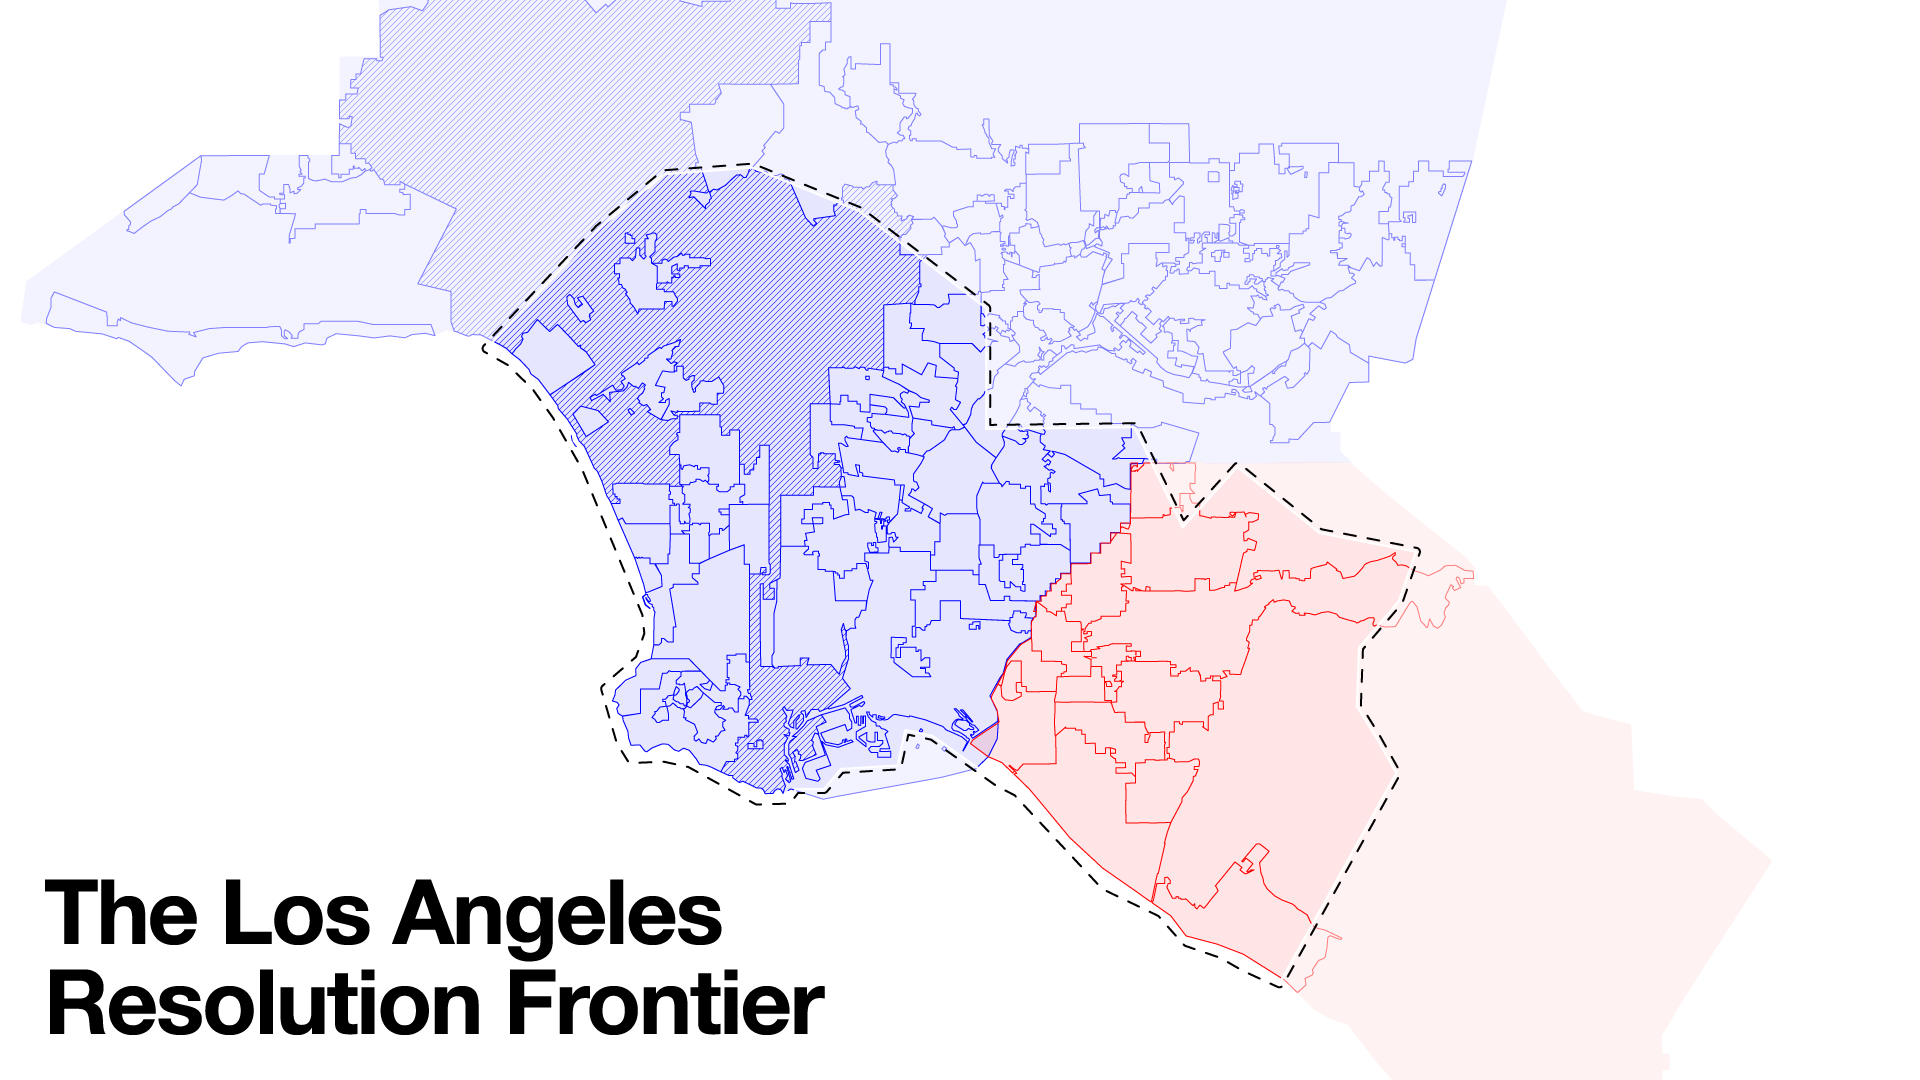 Google Earth’s indifference to existing political and judicial boundaries. The photogrammetric model of Los Angeles (dashed line) straddles Los Angeles County (in blue) and Orange County (in red), and its edge slices through no fewer than 11 Los Angeles neighborhoods and 27 cities in Southern California.